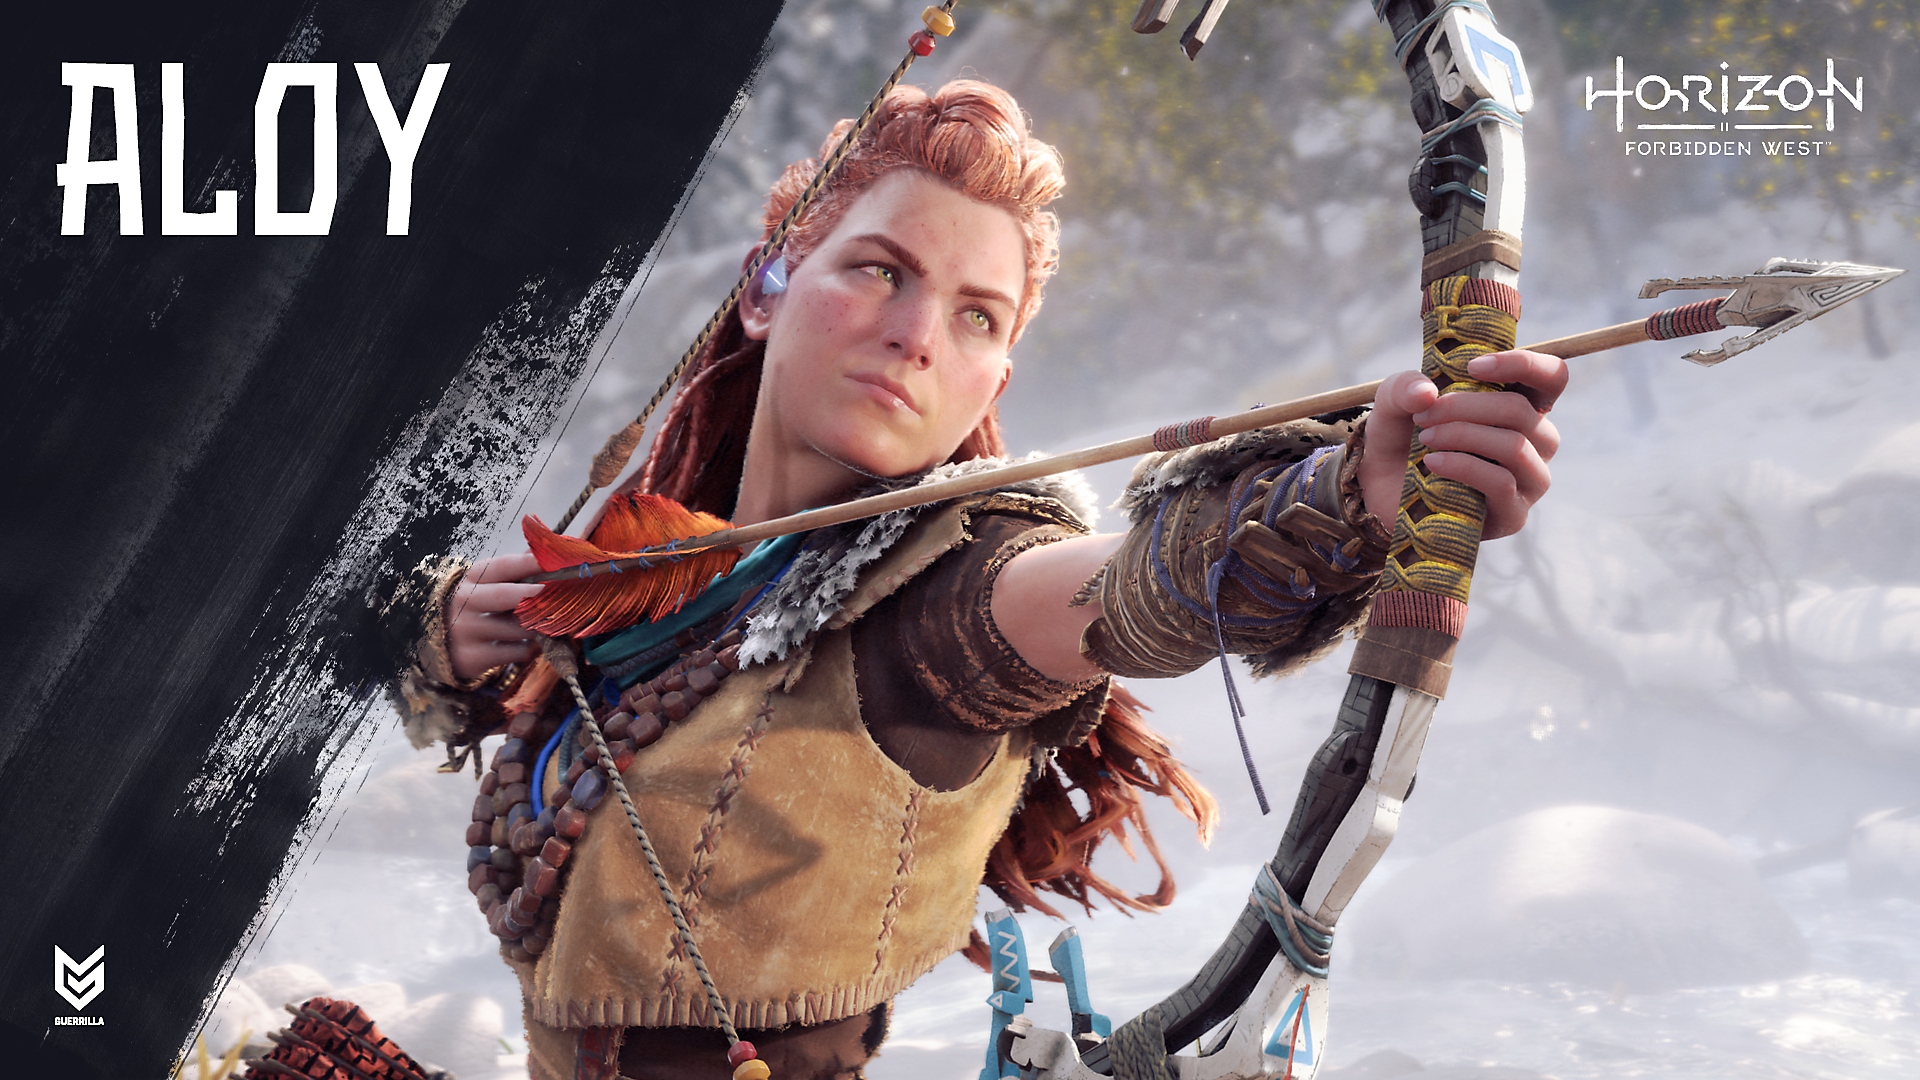 aloy cosplay guide